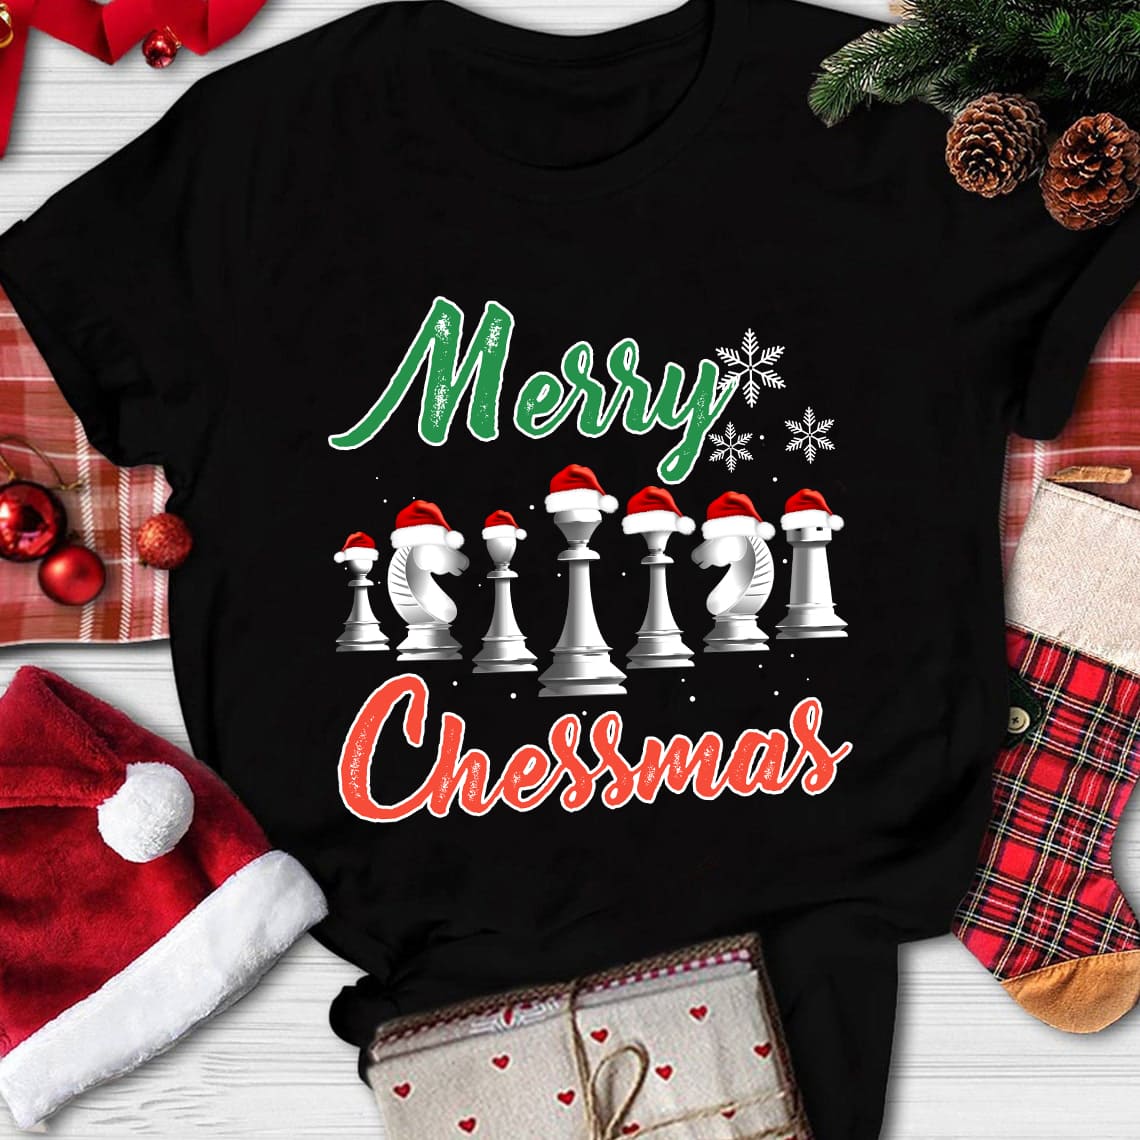 Merry Chessmas - Christmas ugly sweater, love playing chess